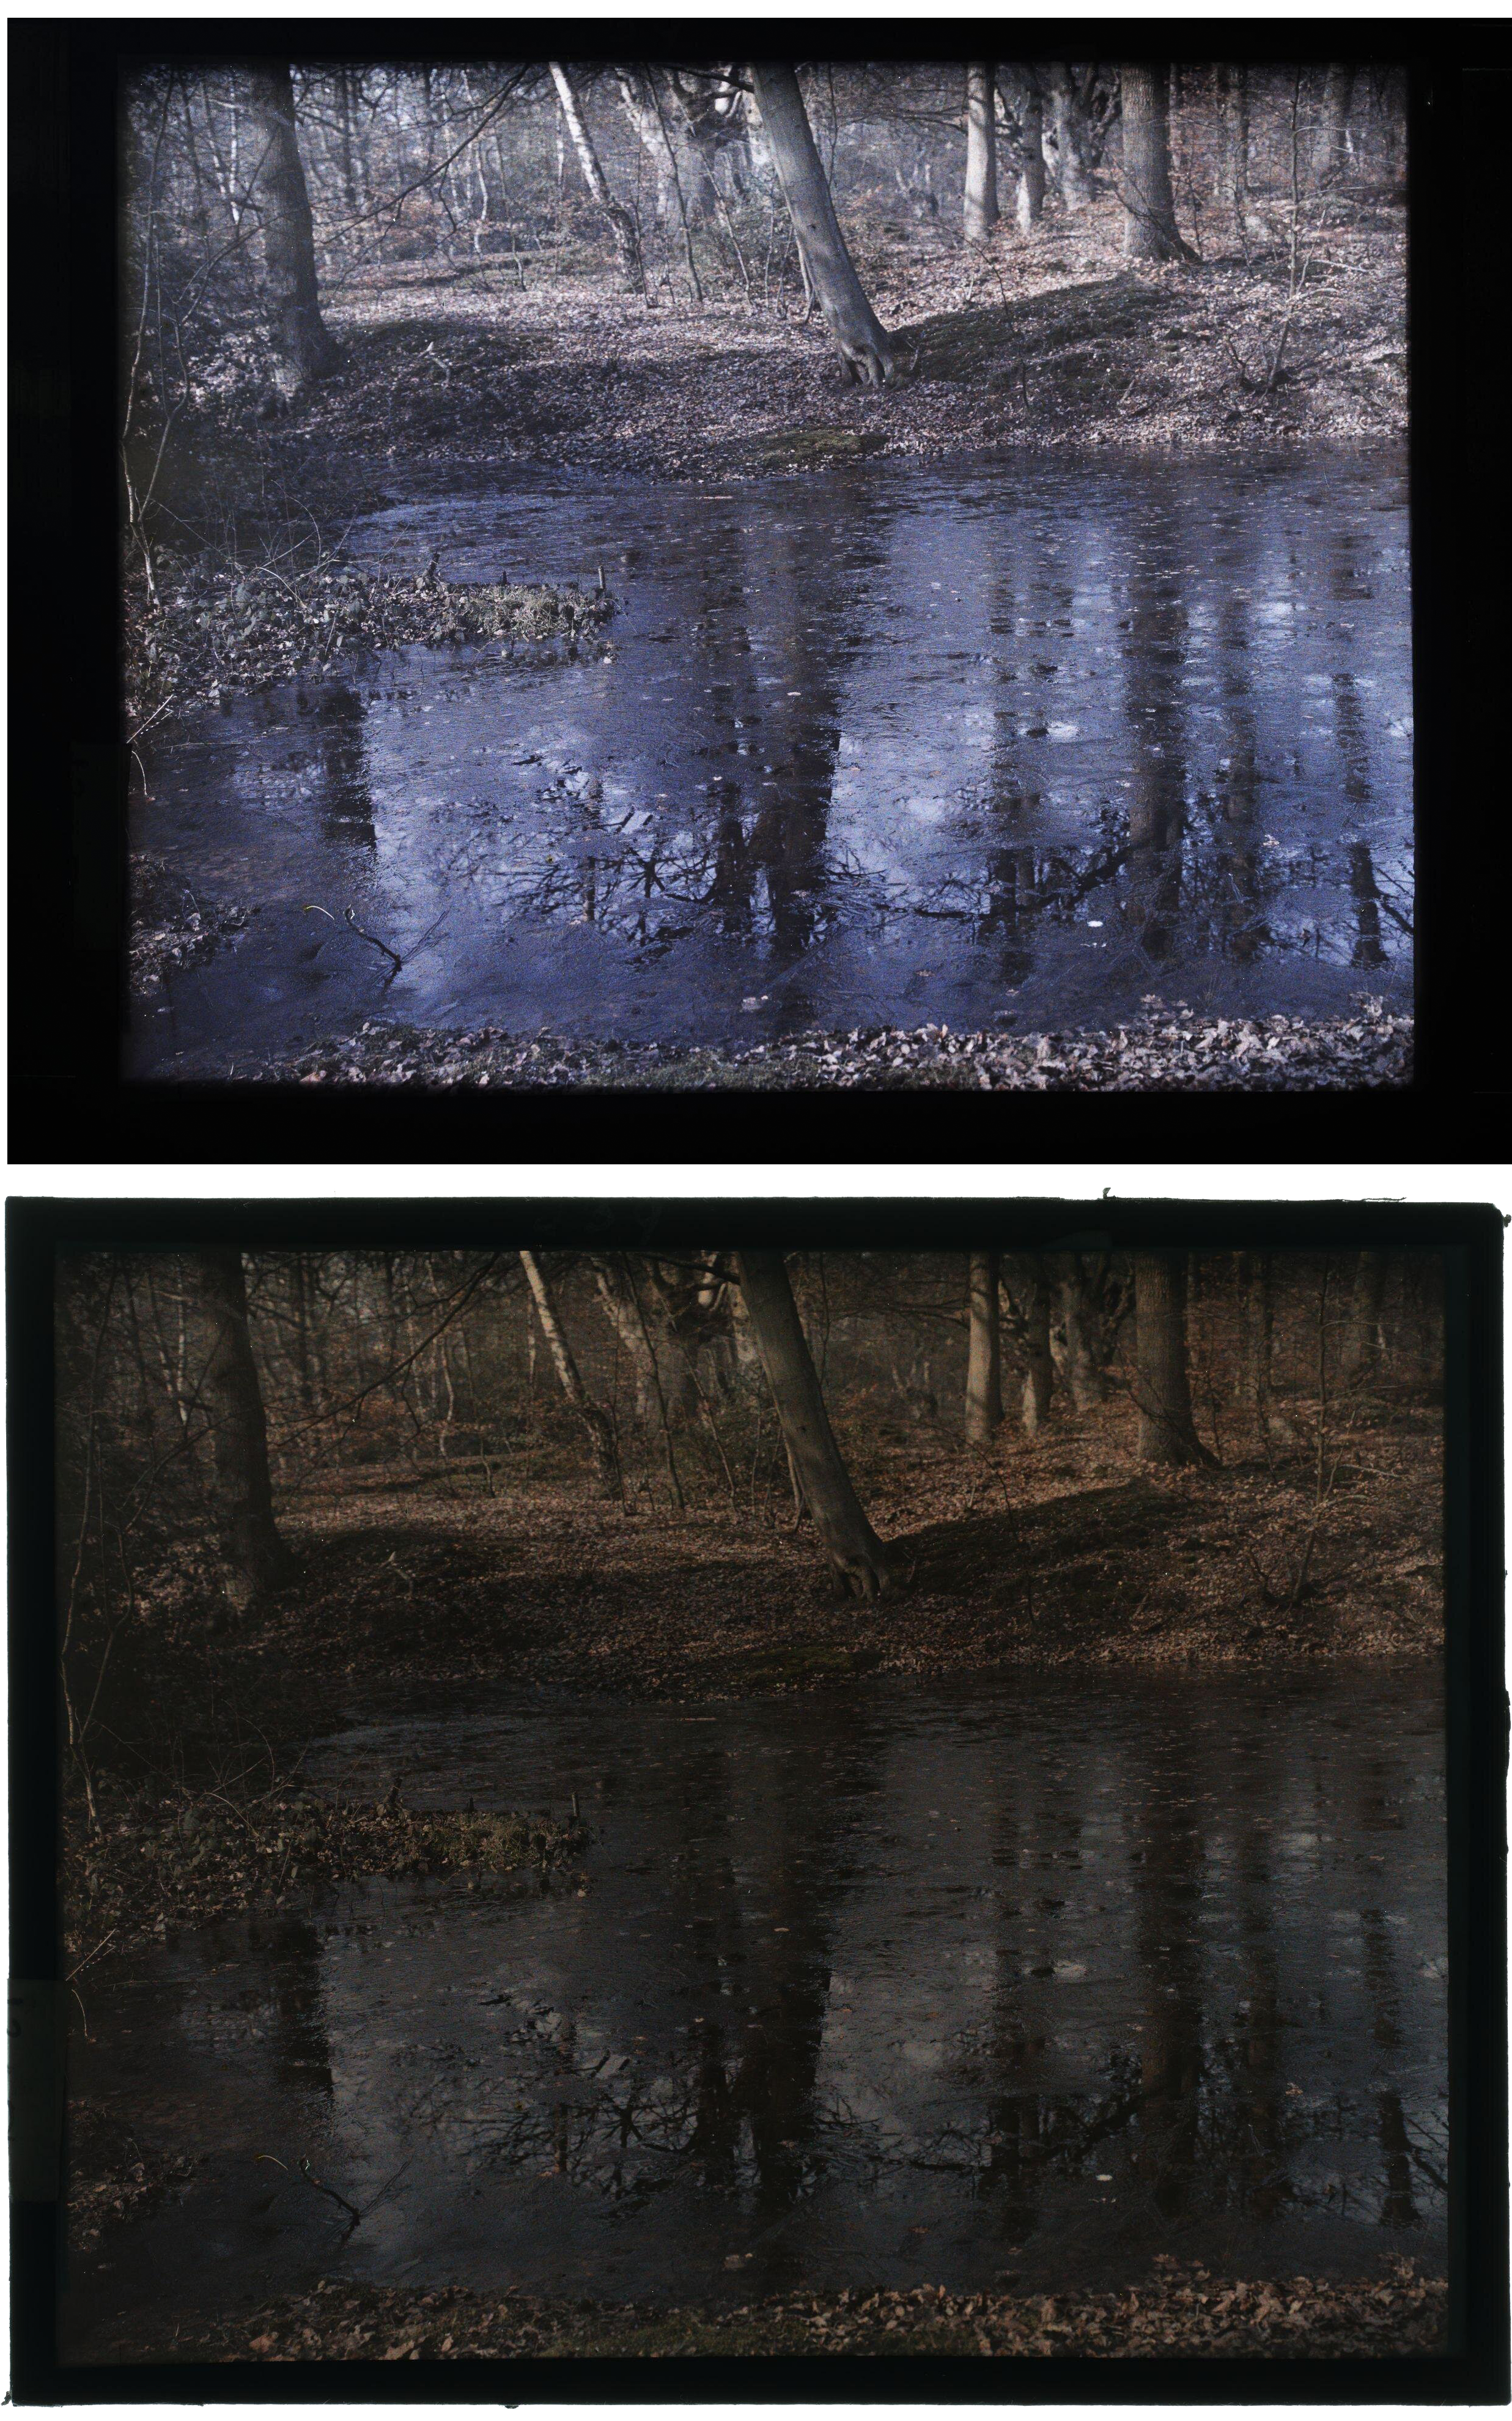 Hugh C. Knowles :: Frozen Pond, ca. 1910. Autochrome. Photograph depicting a pond, partially frozen, surrounded by woodland. The trees are reflected on the surface of the pond. | src The Royal Photographic Society Collection at the V&A Museum